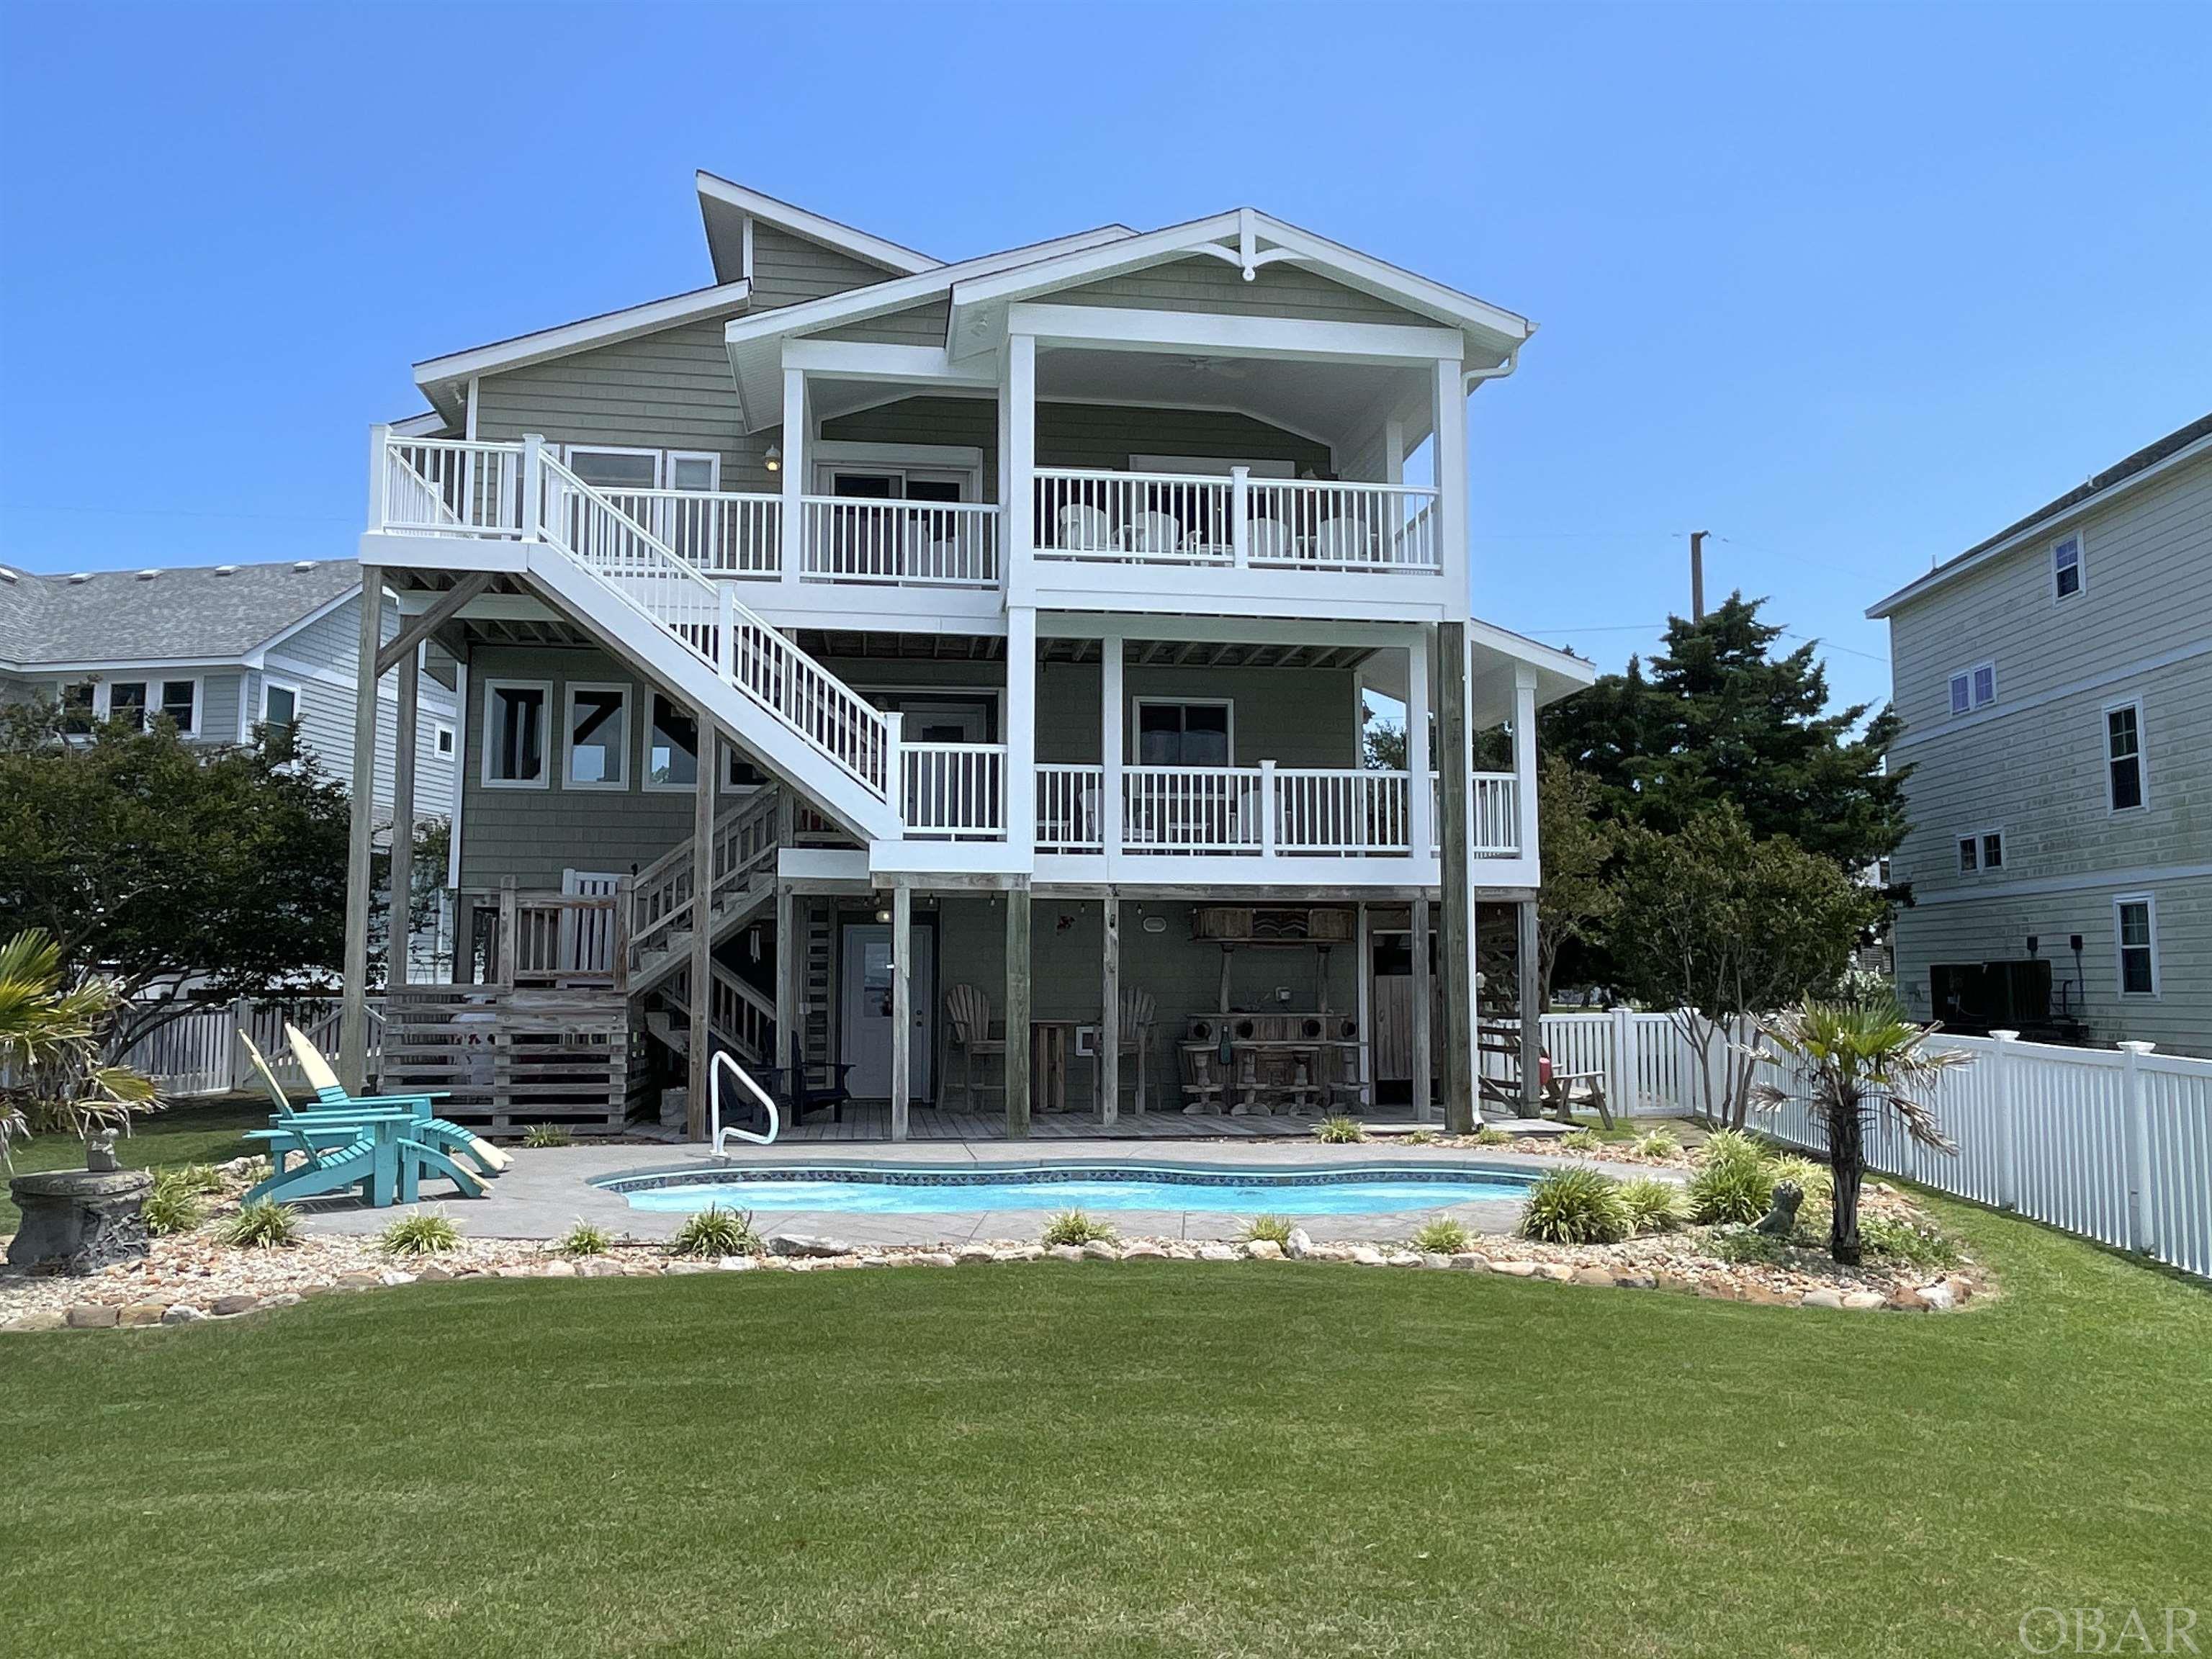 Welcome home to this stunning Sound front home featuring four bedrooms and two and a half baths with a saltwater pool and private pier. The spectacular panoramic view is as good as it gets in the OBX. Literally, food for your soul! Nestled on the serene Kitty Hawk Bay with easy access to the open waters of the Albemarle Sound this exceptional home offers a truly remarkable combination of luxurious living spaces. The home boasts an abundance of natural light with an open floor plan that seamlessly connects the living room, dining room and kitchen. High end finishes include granite counter tops, gas cook top, wall oven/ microwave with custom kitchen cabinets that offer ample storage. The center island offers additional countertop space for cooking prep and bar seating. The primary bedroom is on the upper level with a private bathroom featuring double sinks and a tiled shower. The lower level bedrooms are spacious, offering a serene space to rest and relax. The sunroom can double as an office or a cozy sitting space. The home also has a deep two-car garage with plenty of storage, hurricane shutters and two outdoor showers. Enjoy your private 210 ft pier for endless activities such as crabbing, fishing, bird watching, kayaking, paddle boarding, sunset viewing and star gazing. The pier was built in 2018 with ThruFlow Marine Decking. The open surface design protects against uplifting water and wind and hence is storm resistant and maintenance free. Hop on the one of the best multi use paths that OBX has to offer right at the end of your driveway.  Sold fully furnished with a small list of exclusions, this home is turn-key and move in ready!!  See associated docs for a full list of updates and the Bill of Sale with exclusions.